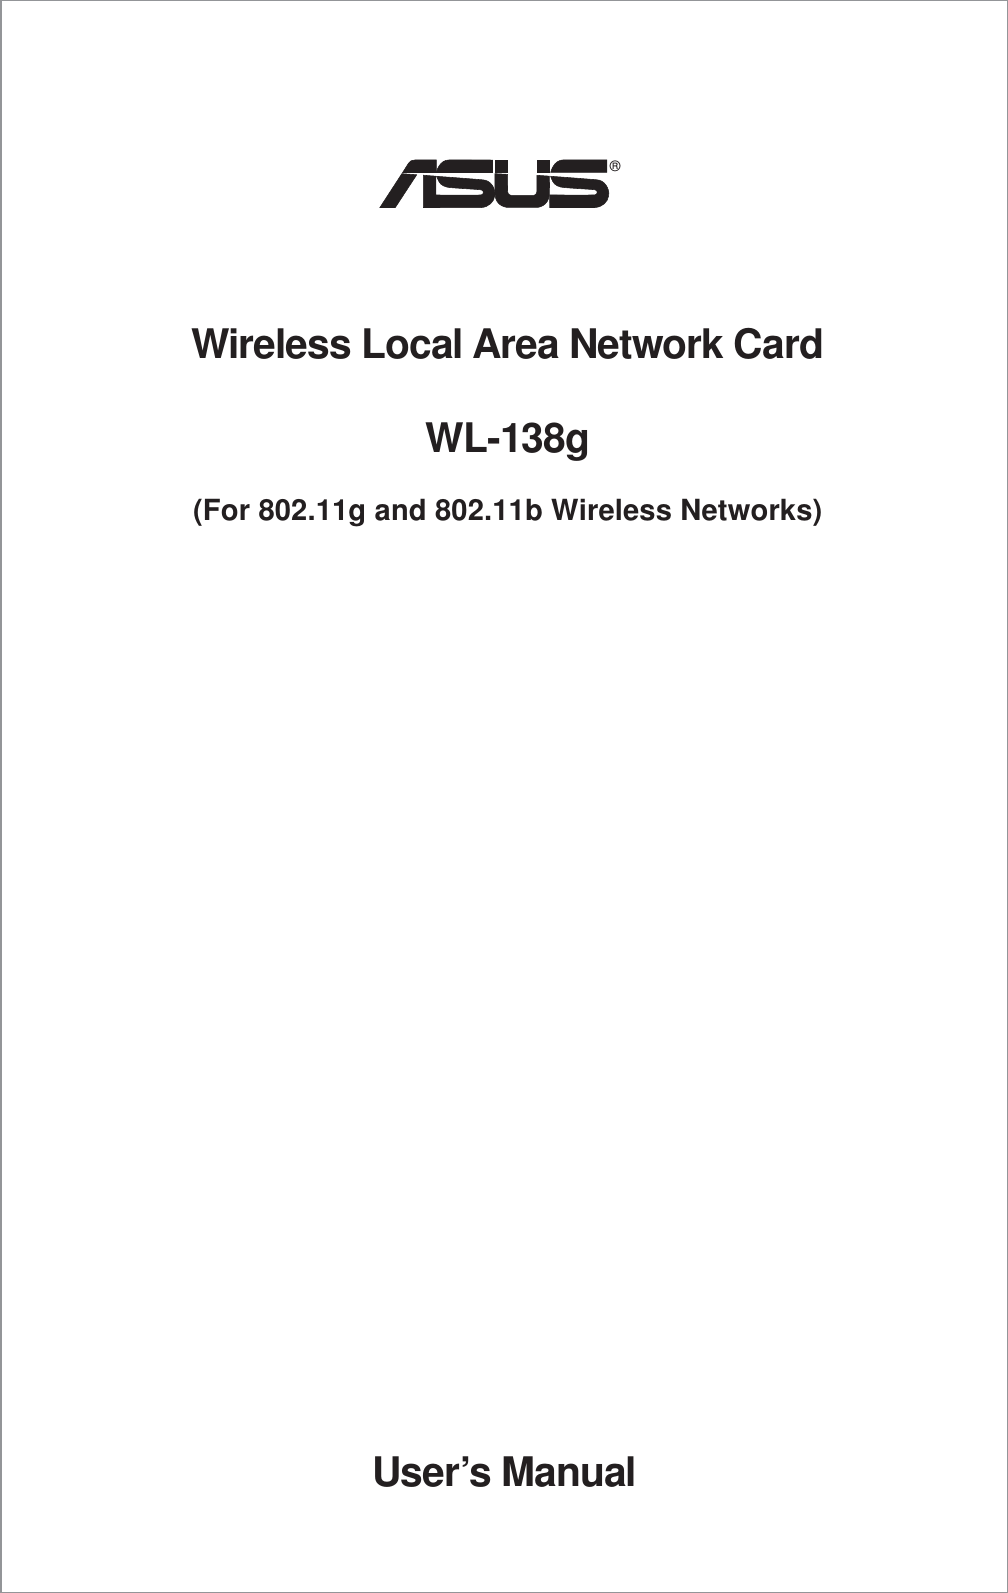 ®User’s ManualWireless Local Area Network CardWL-138g(For 802.11g and 802.11b Wireless Networks)